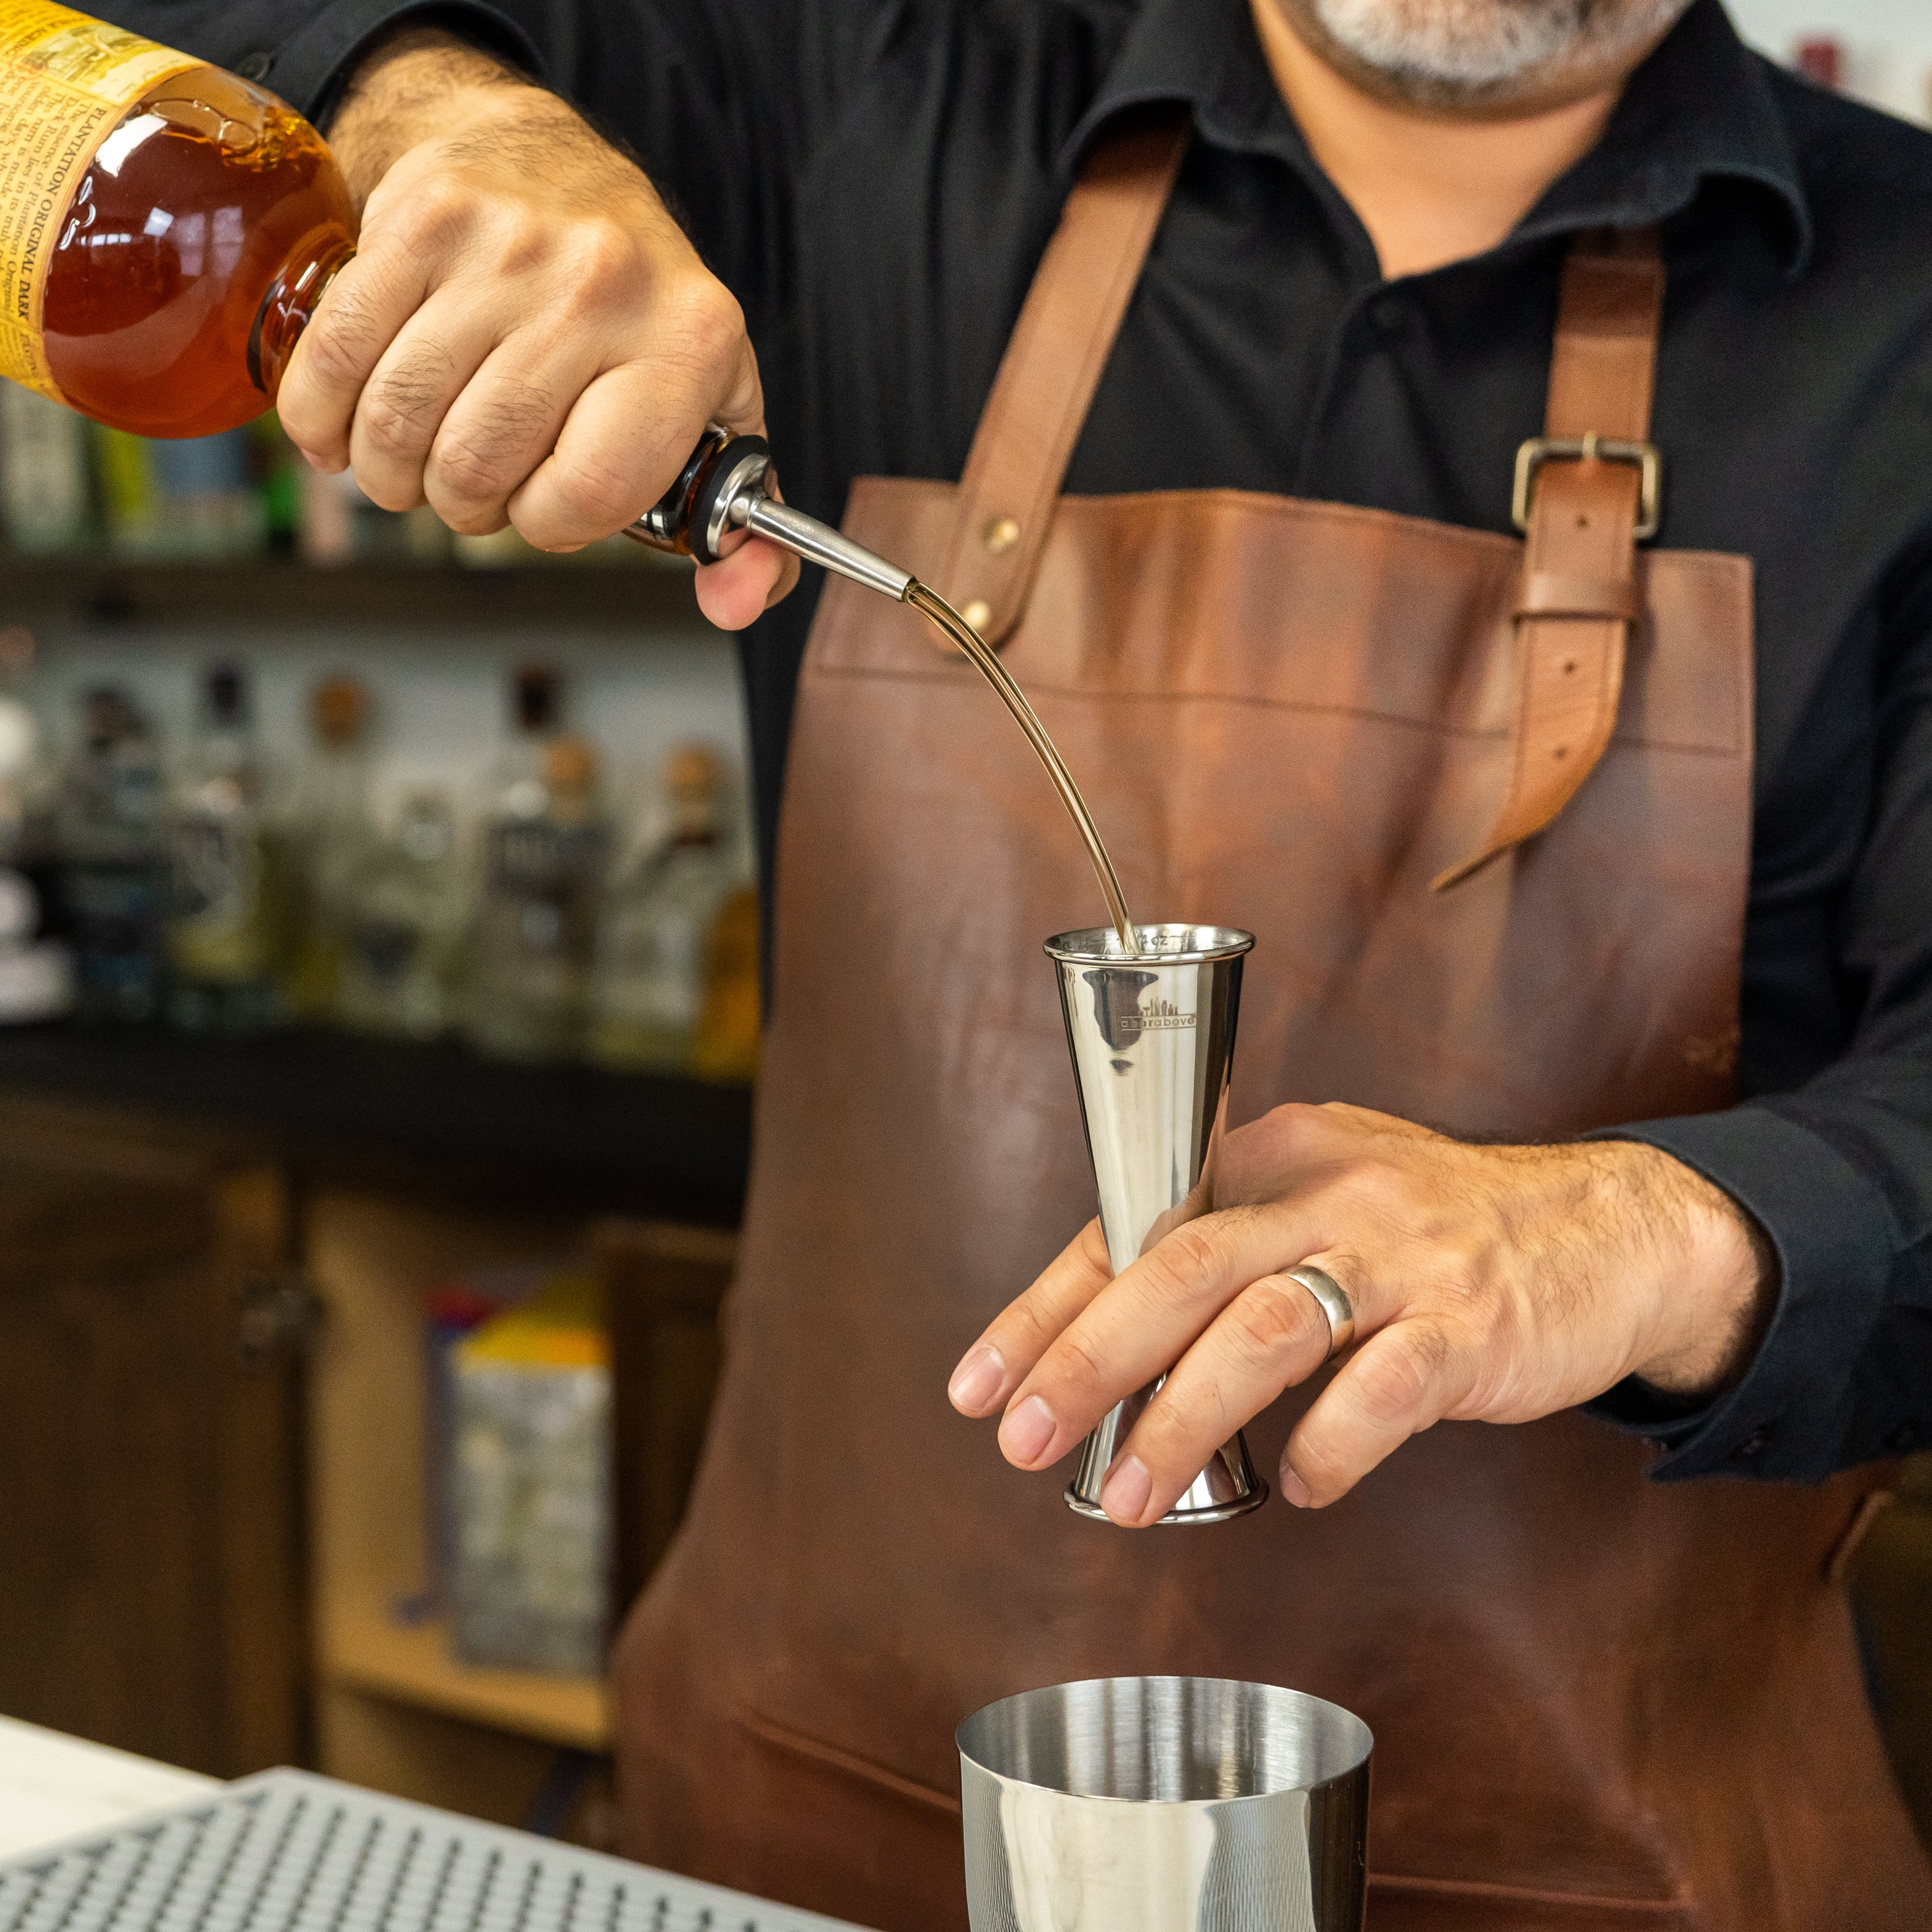 Bartender's hands pouring alcohol from a bottle with a pour spout into a stainless steel cocktail jigger above a shaker tin